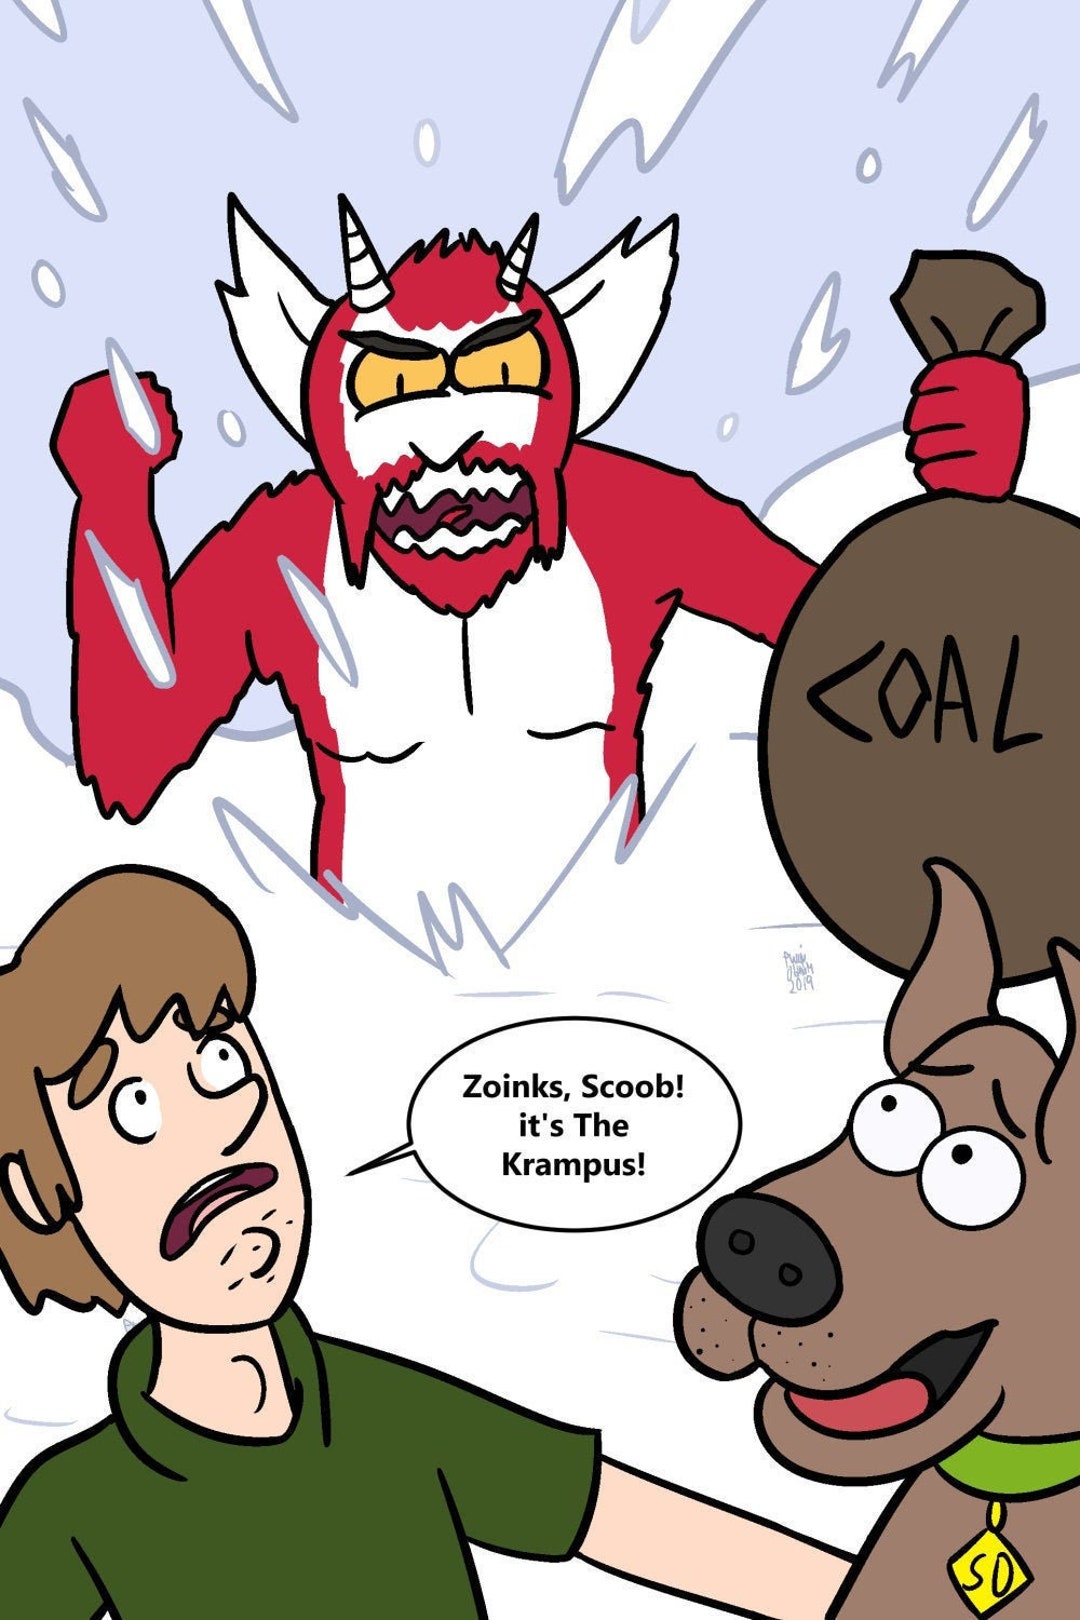 Scooby Doo Vs The Krampus Inspired Christmas Greeting Card Etsy